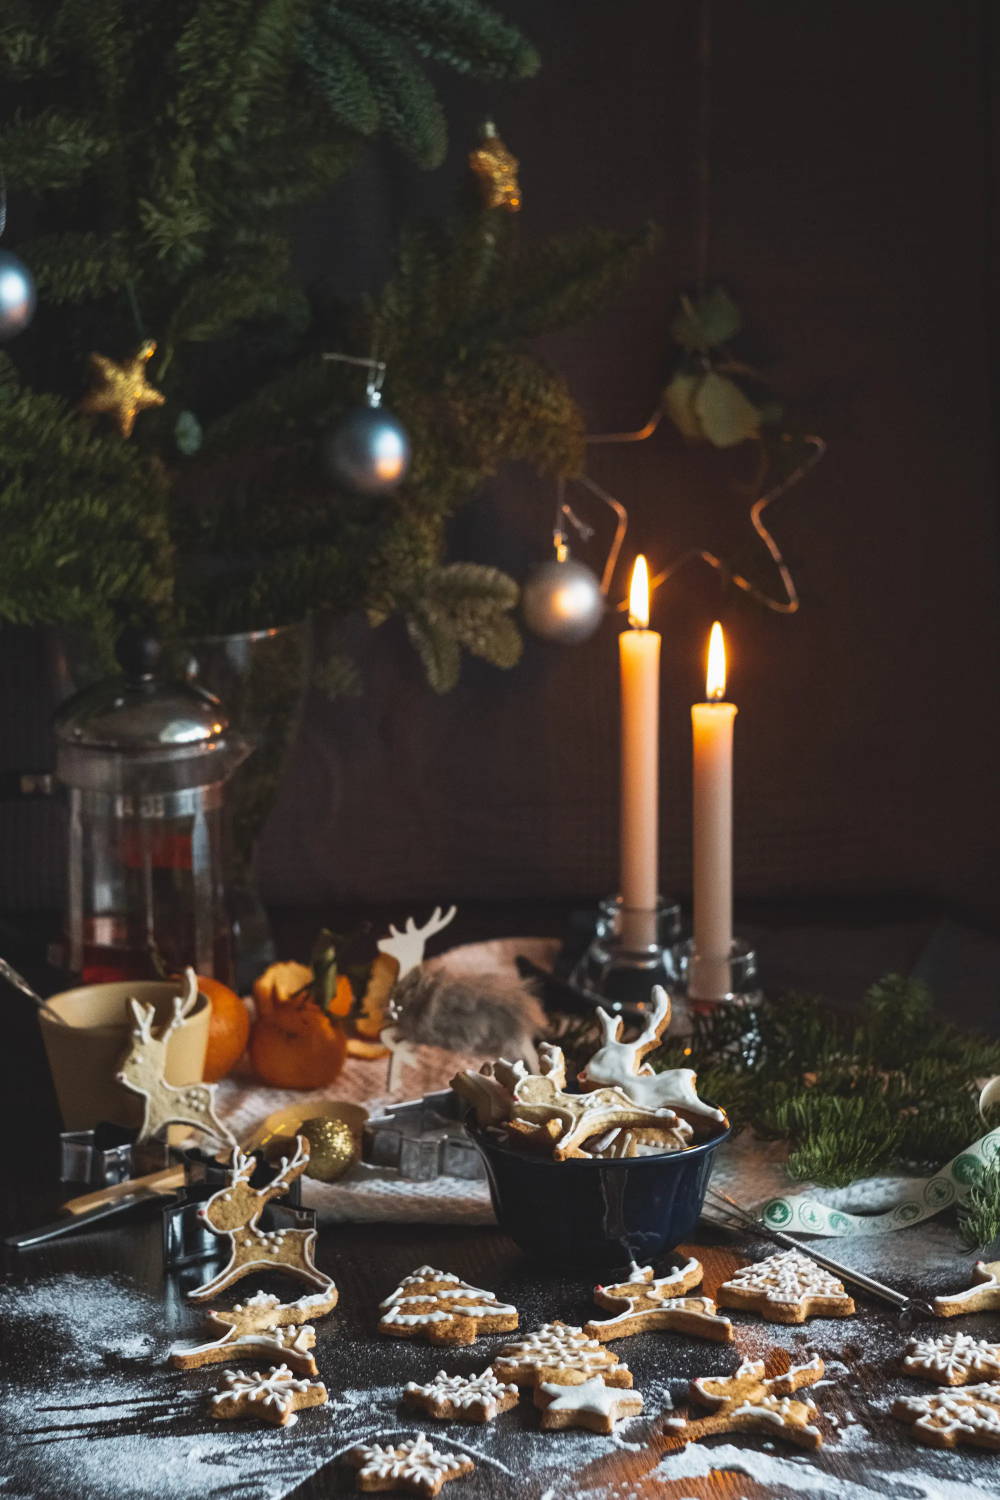 A counter dusted with flour and scattered with gingerbread cookies. In the background, two lit taper candles and several evergreen boughs.